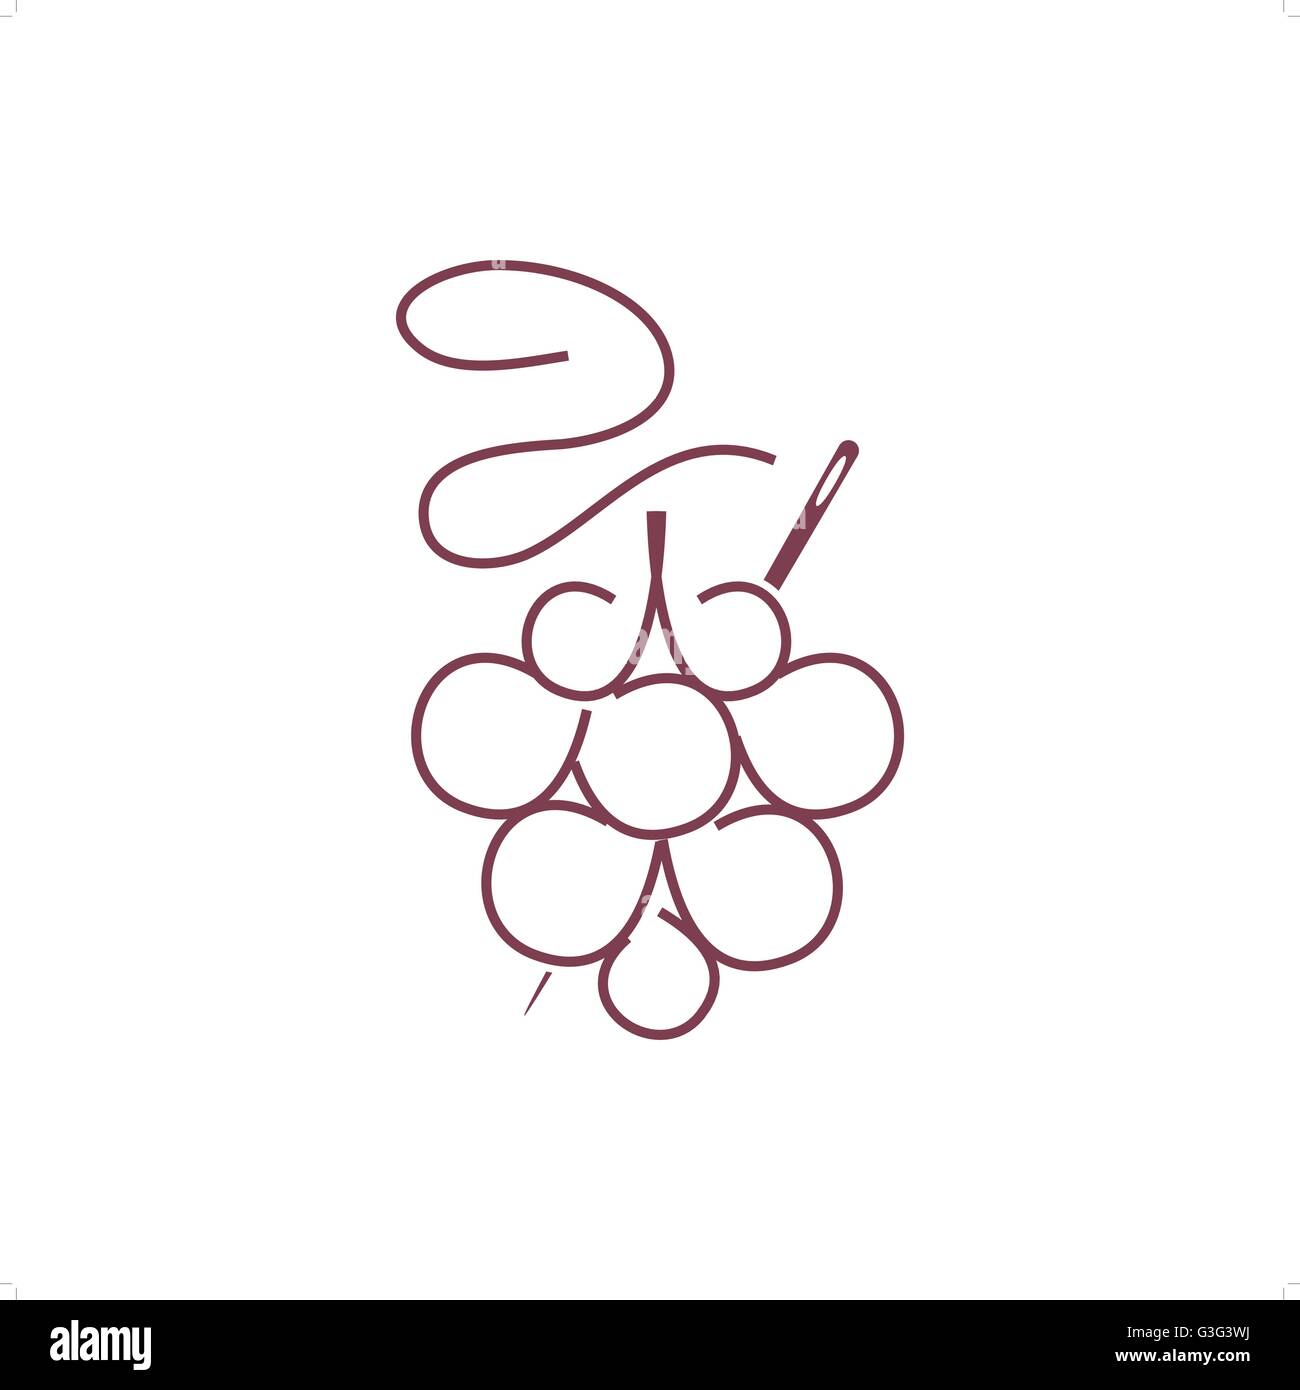 Abstract line drawing purple tailor logo like grapes with a needle vector illustration isolated on white background. Stock Vector